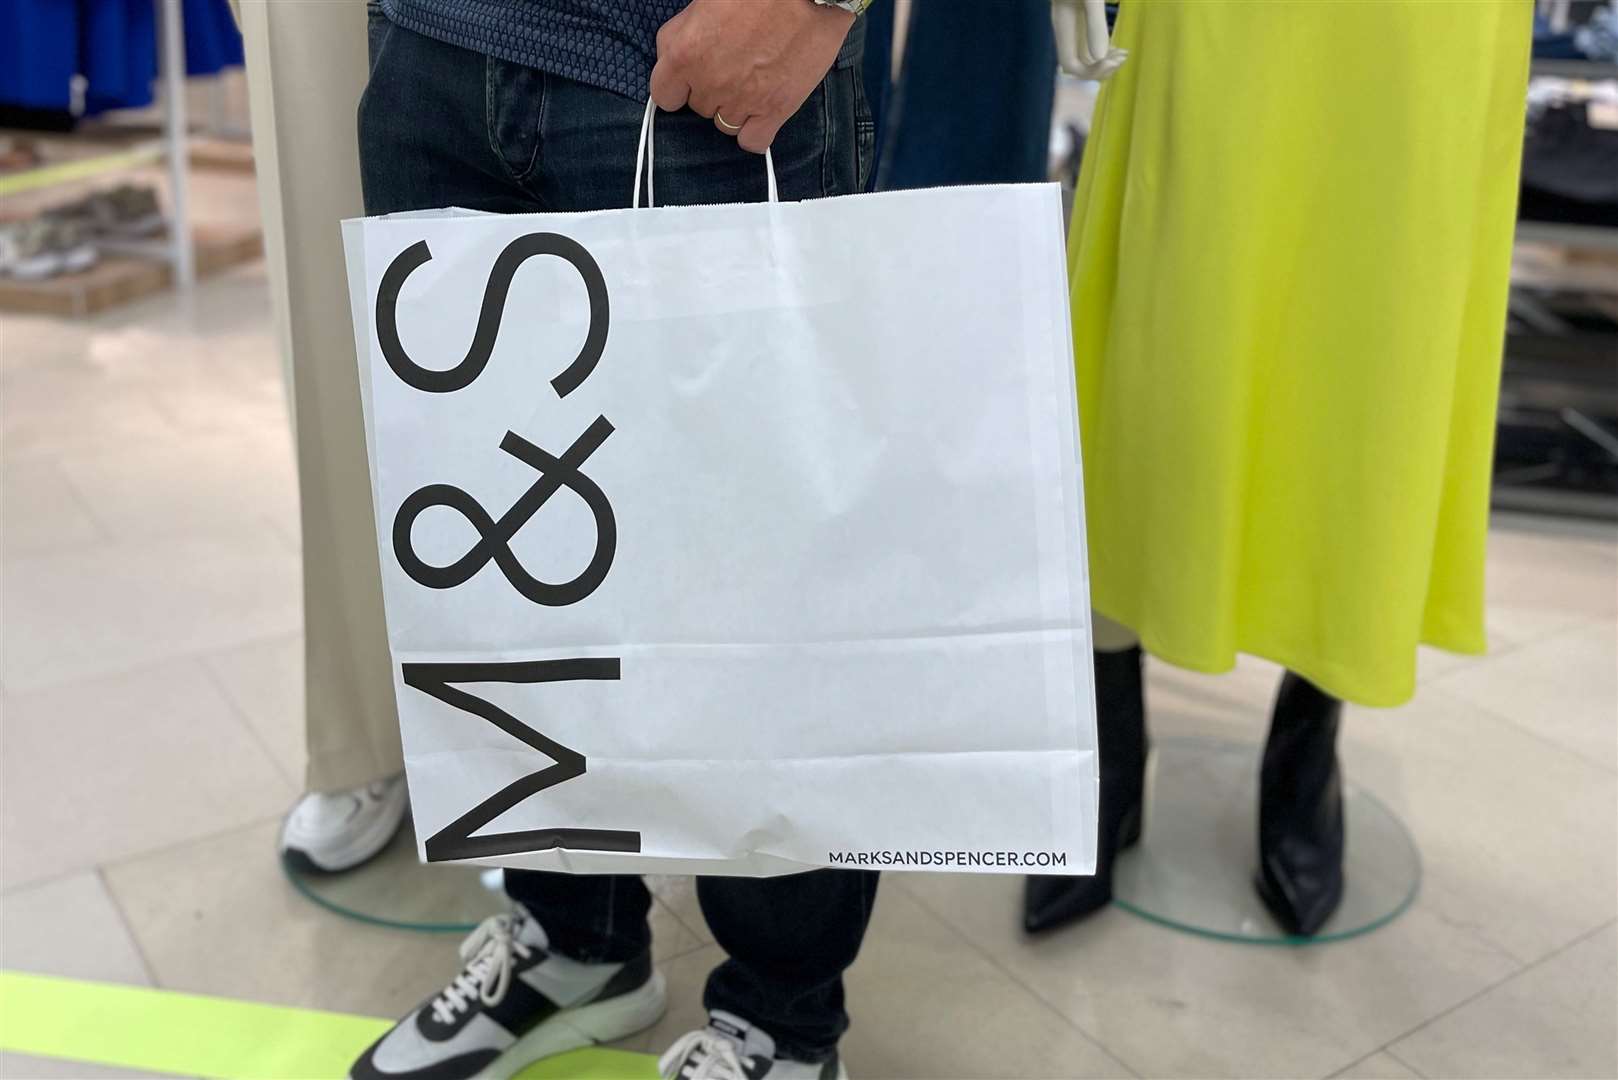 M&S is replacing all plastic bags with paper alternatives. Image: M&S.